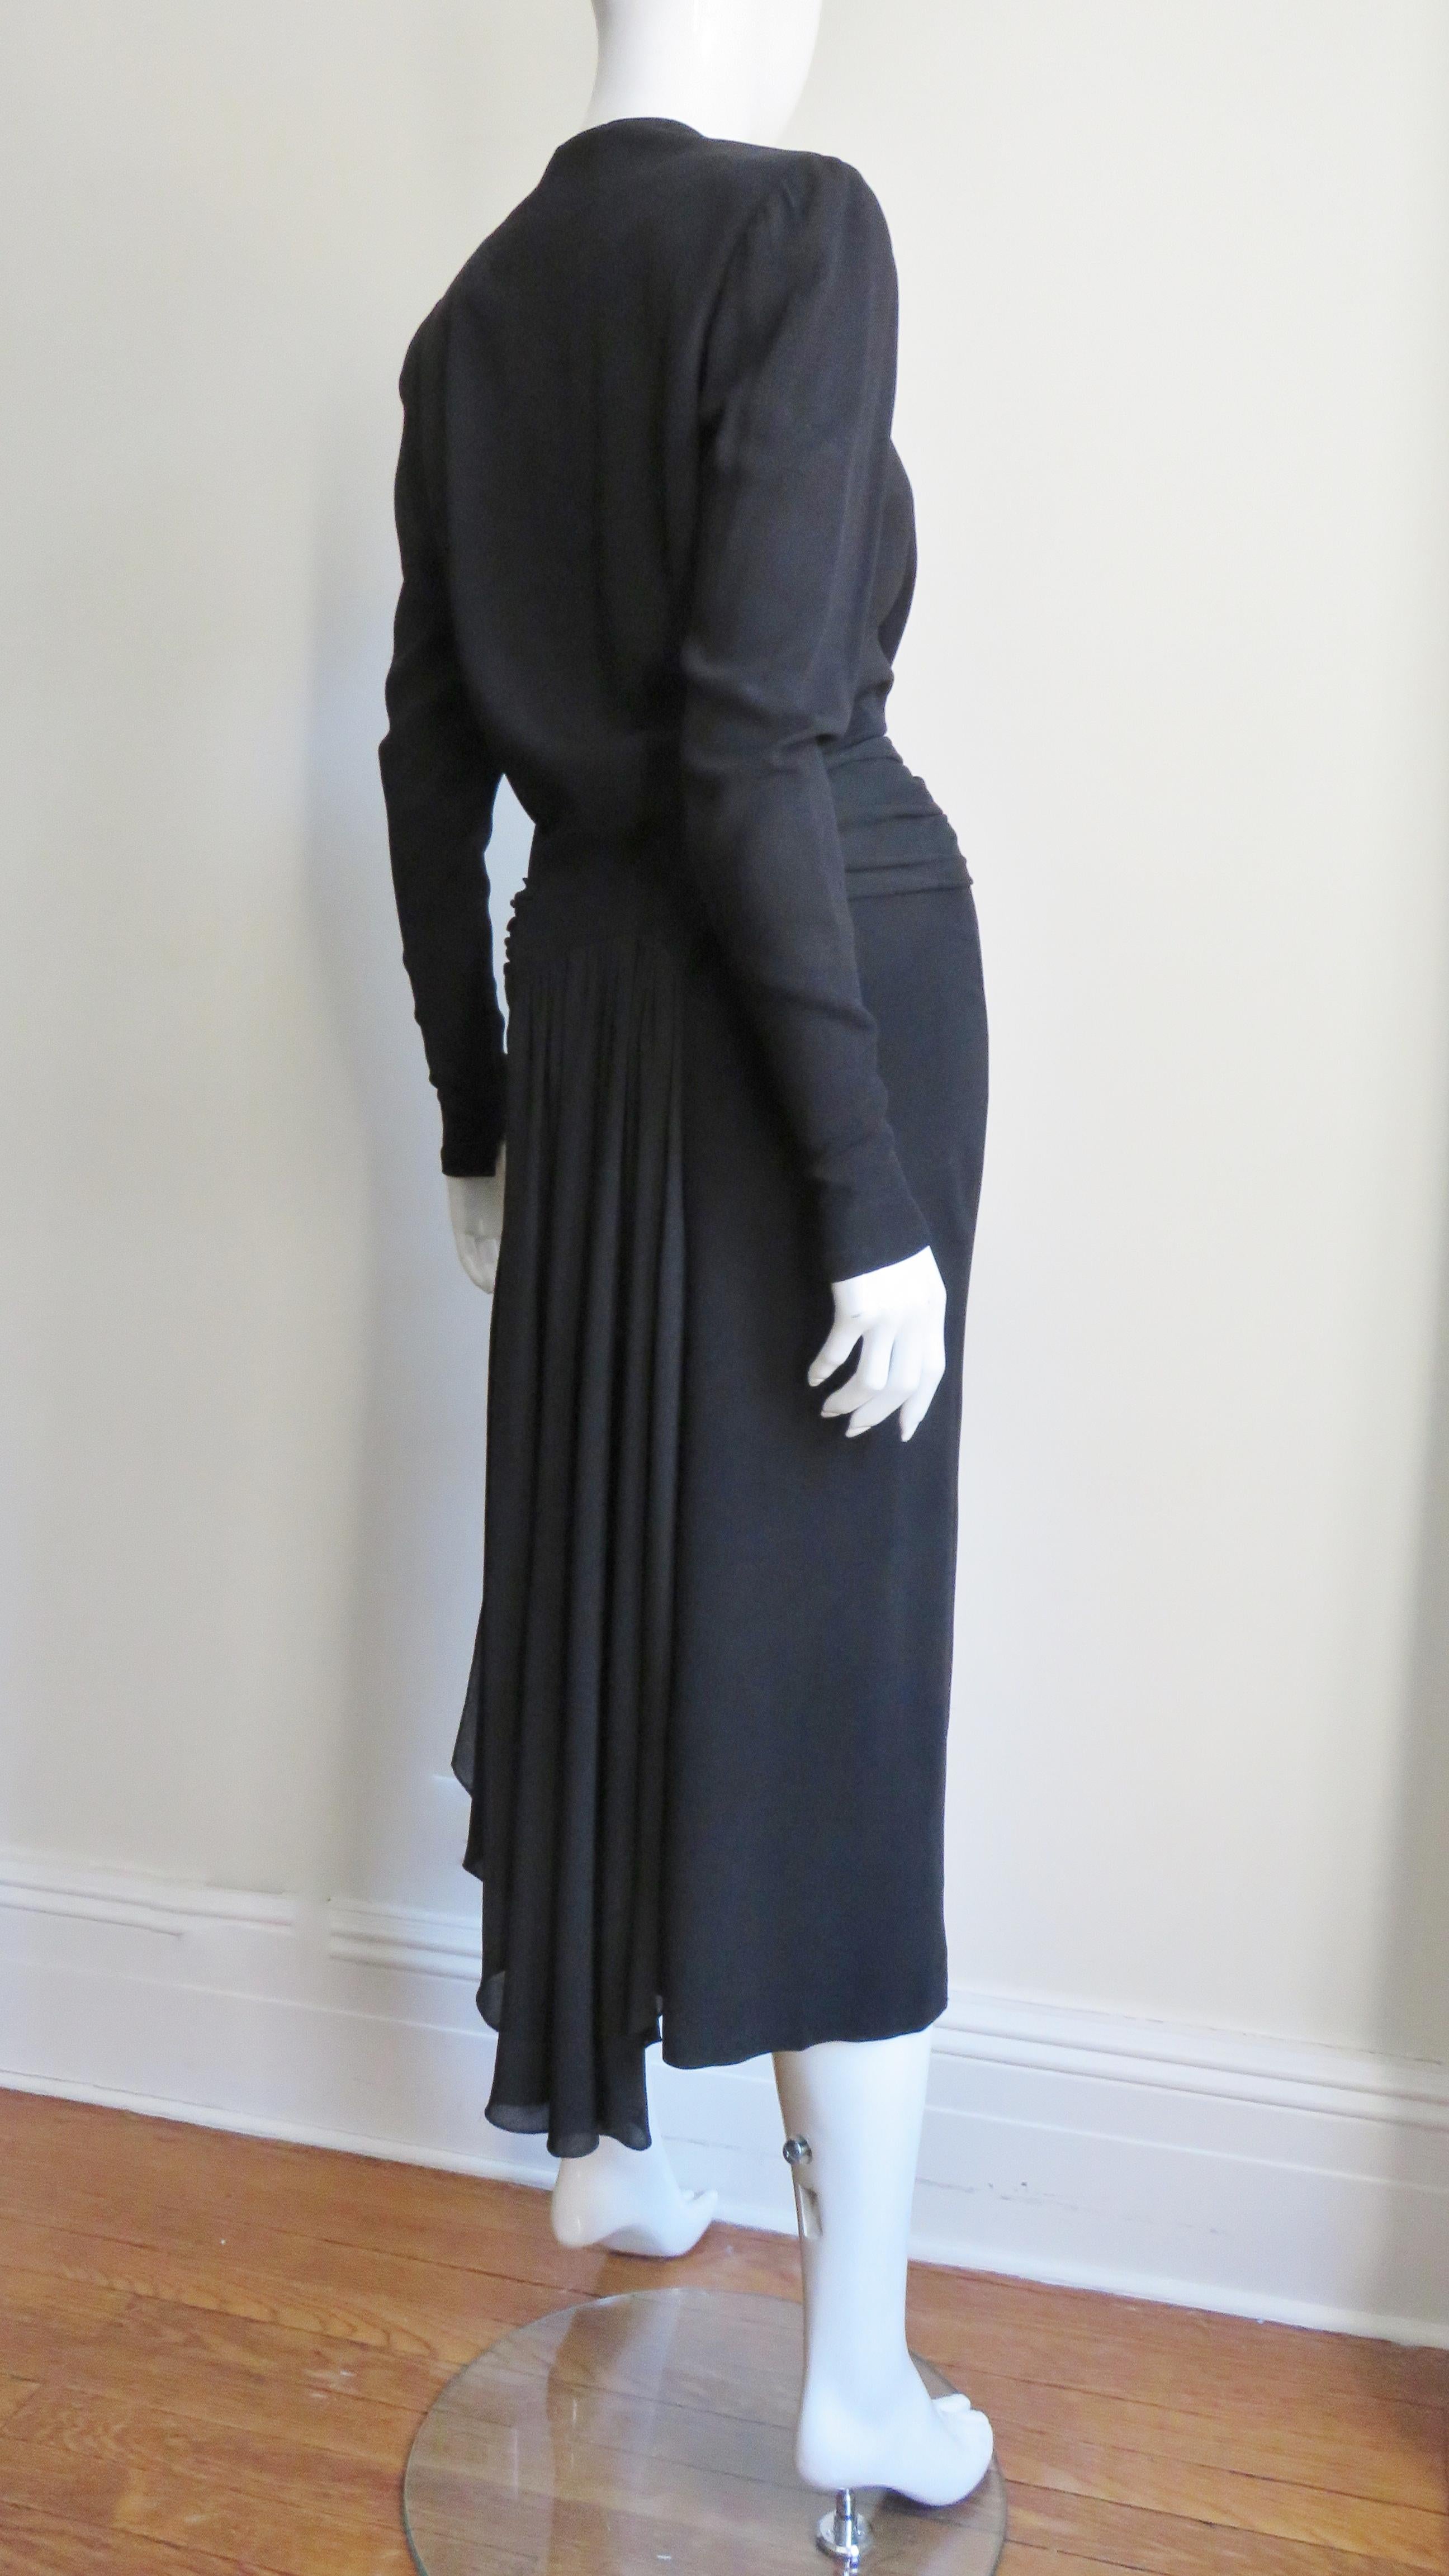 Edna Vilm Top with Waterfall Back and Skirt 1940s For Sale 3